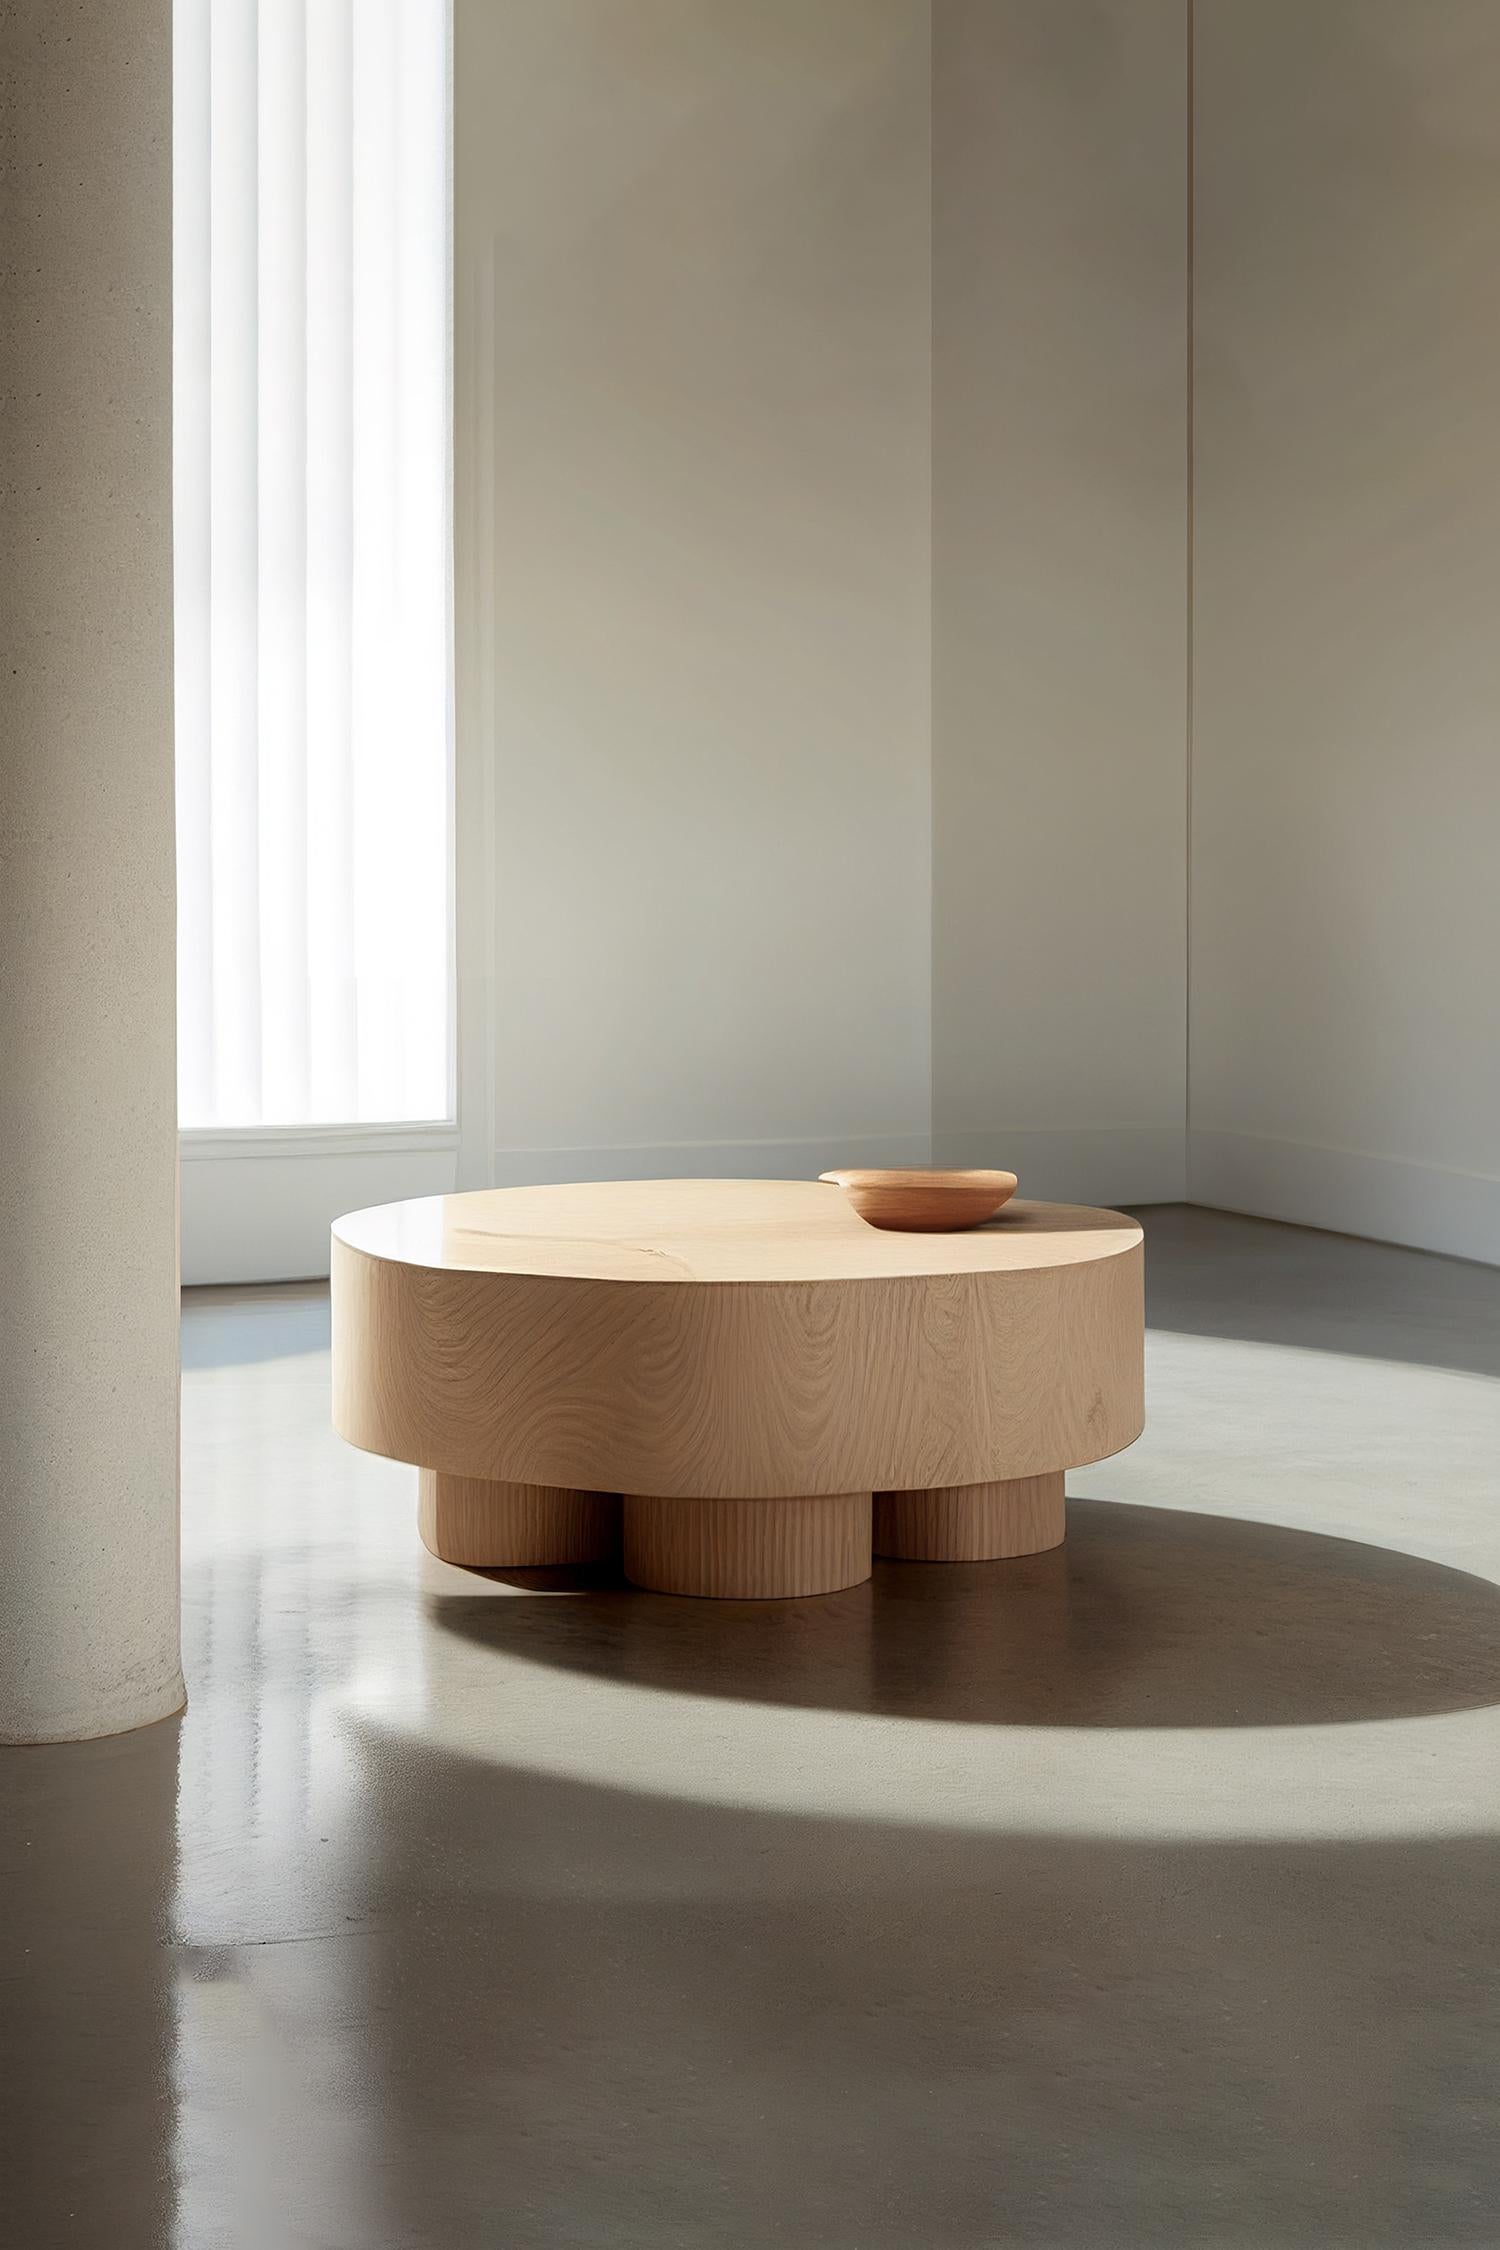 Mexican Brutalist Round Coffee Table in Red Oak Wood Veneer, Podio by NONO